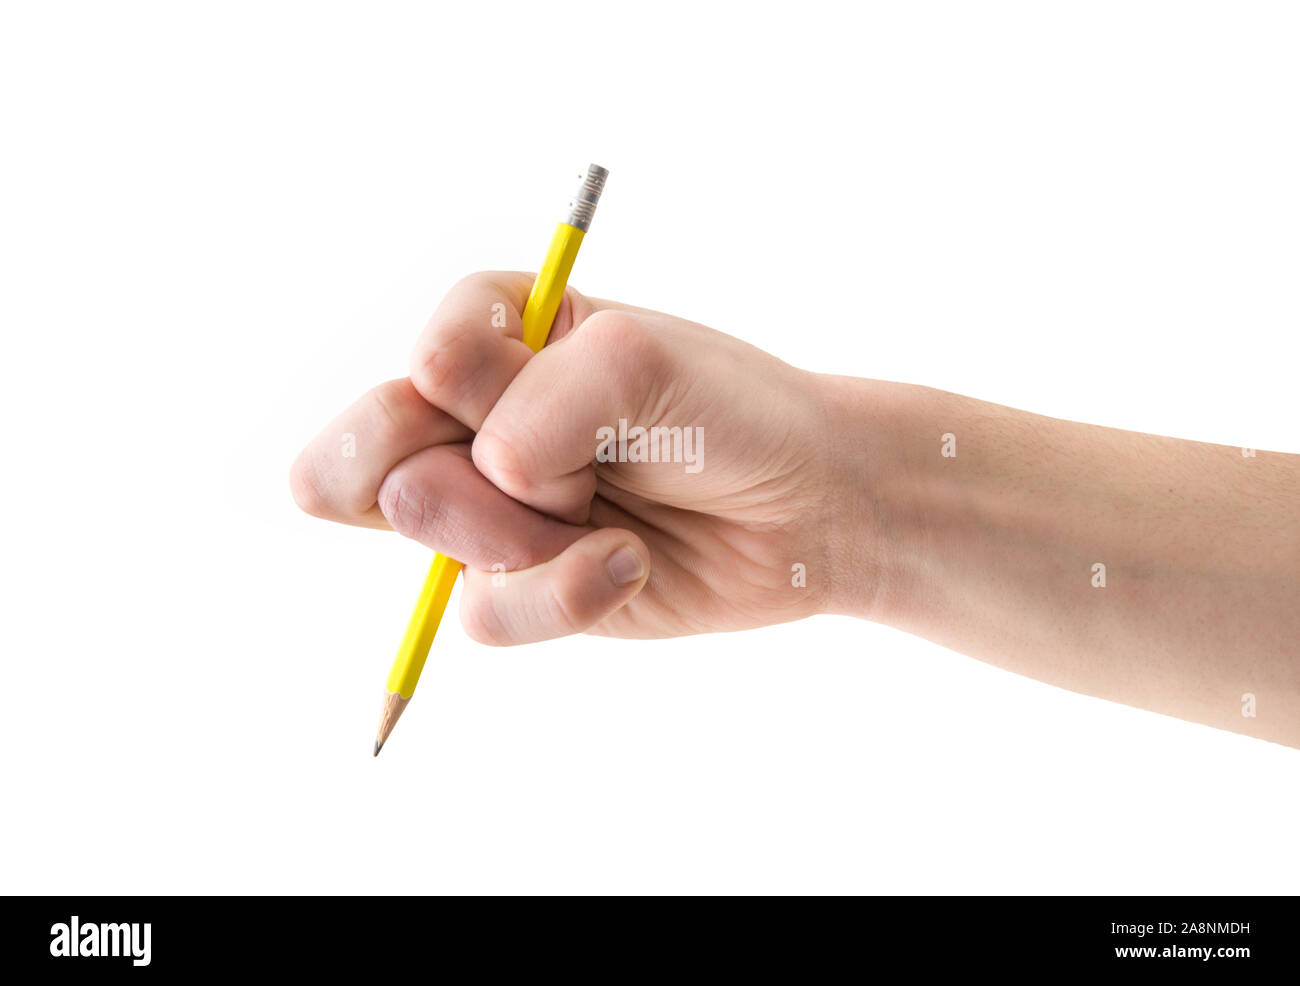 distorted hand with pencil on white background Stock Photo